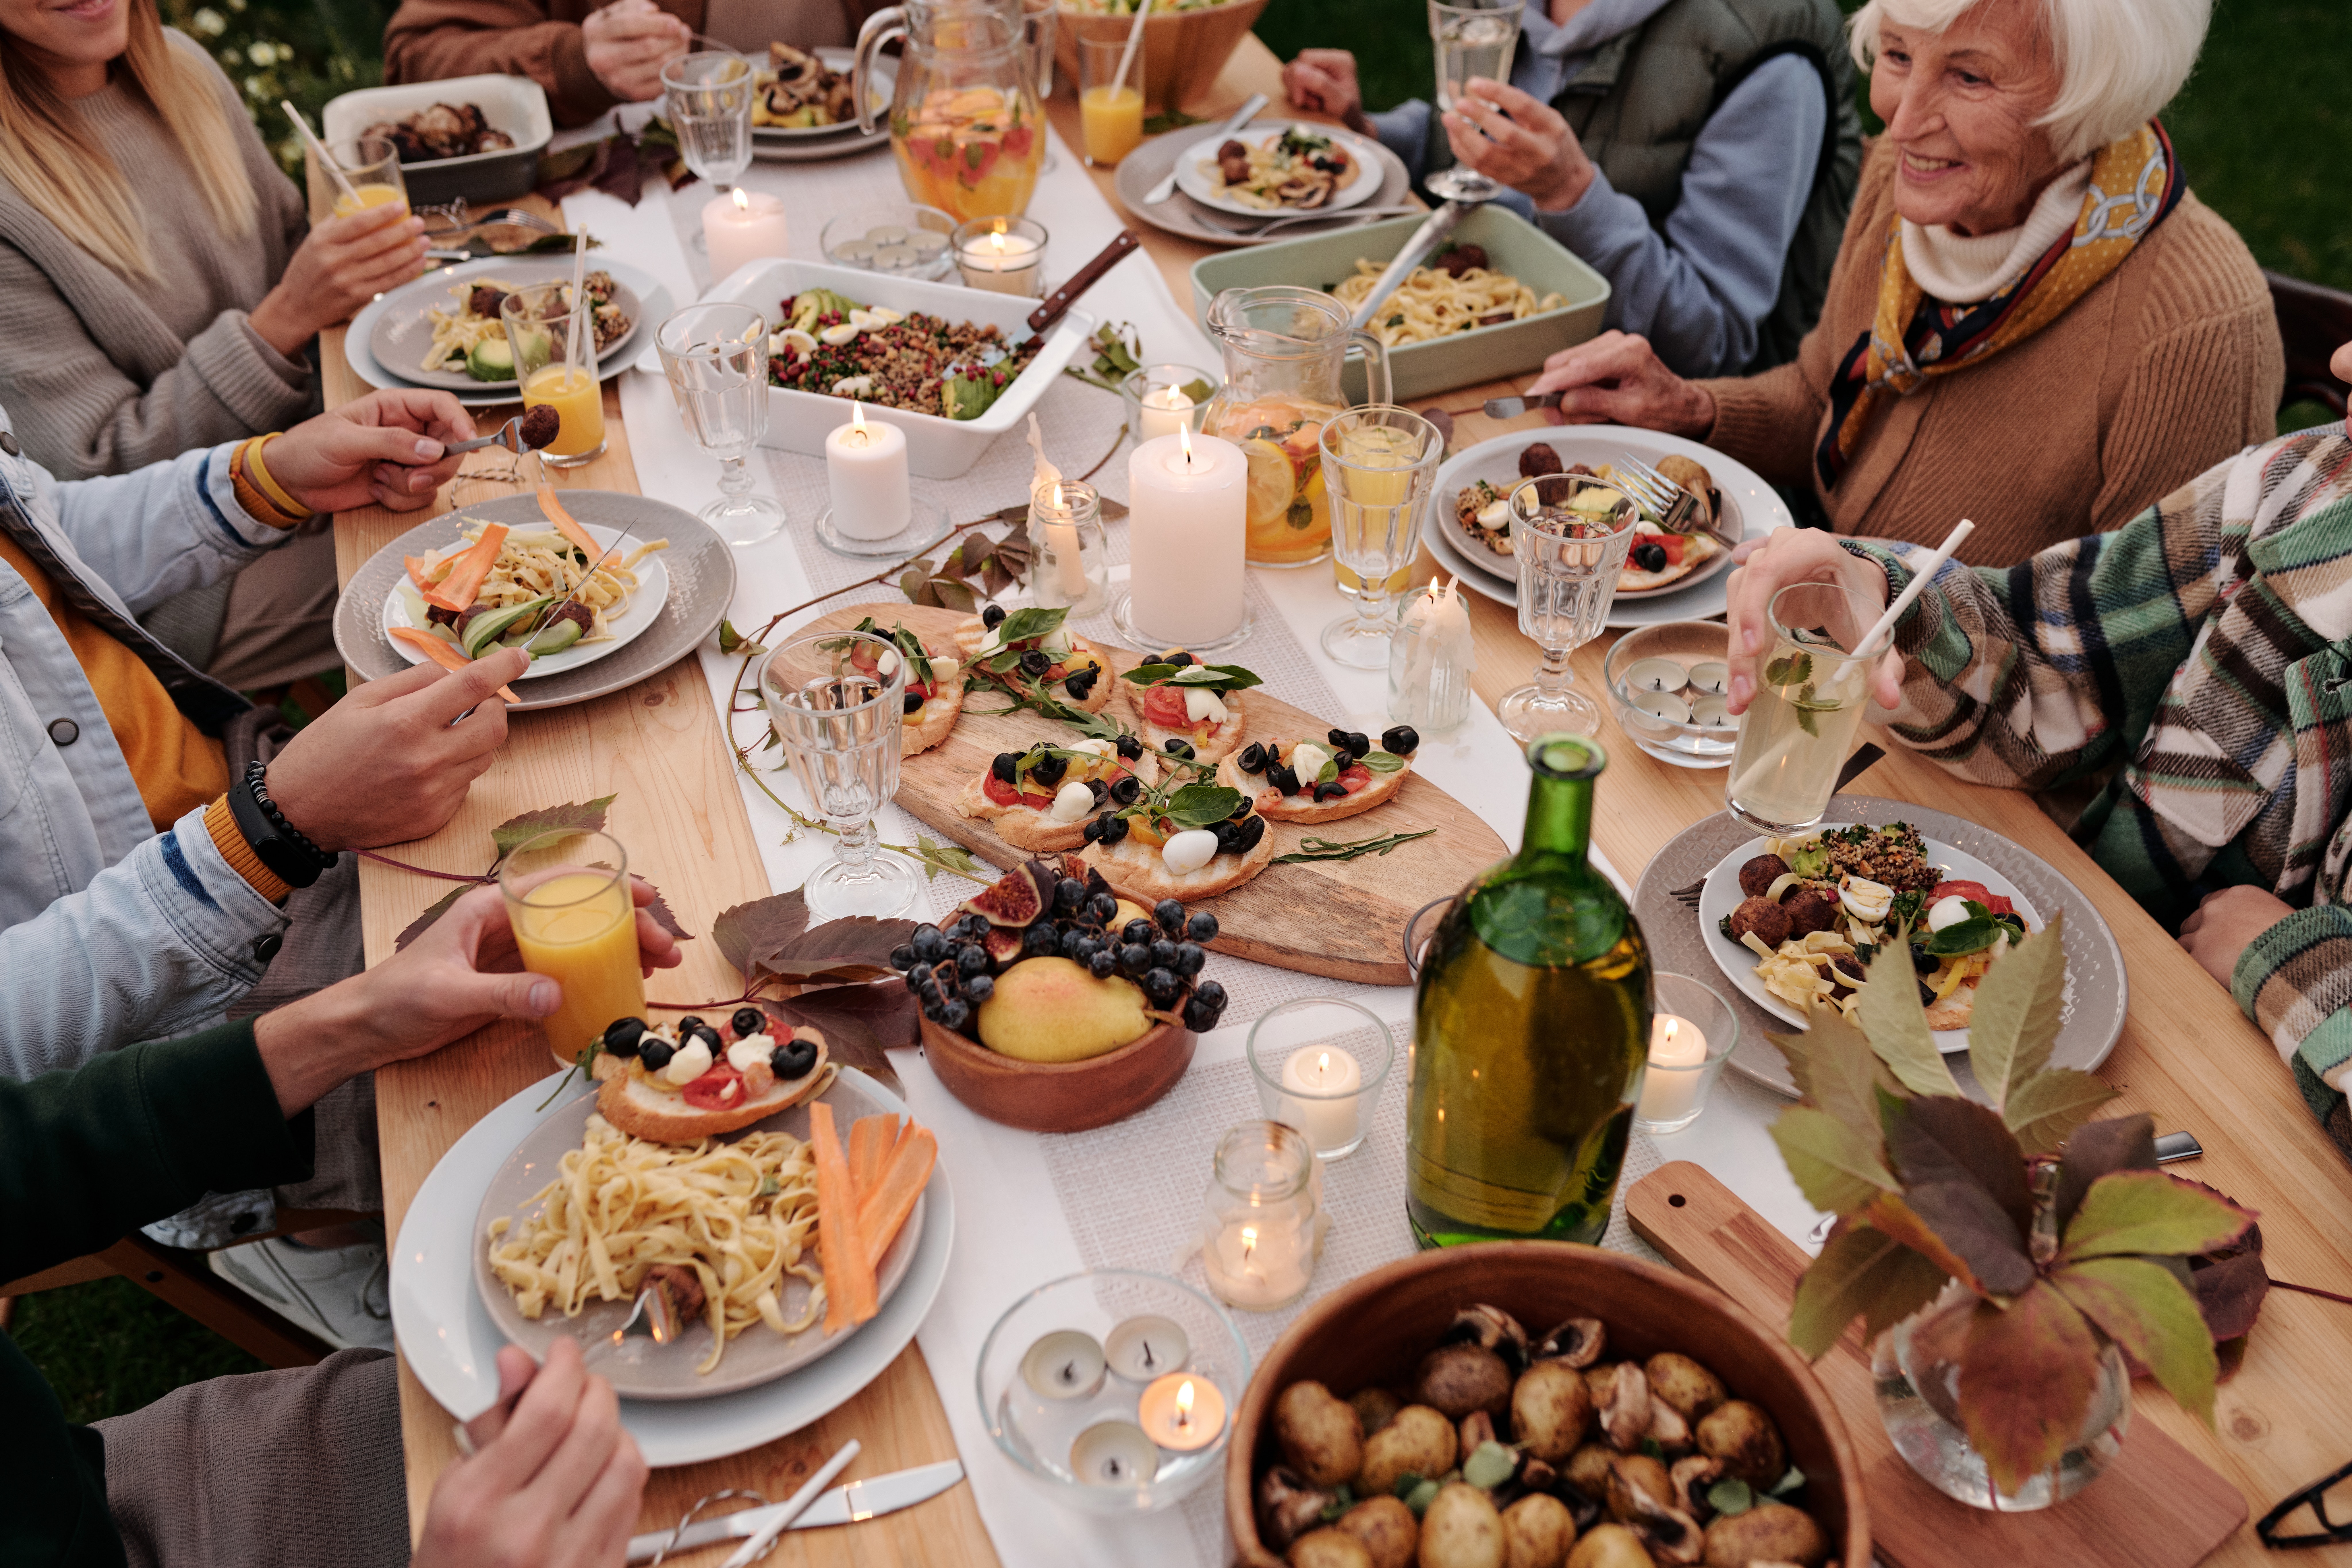 Setting The Table For Your Family’s Health